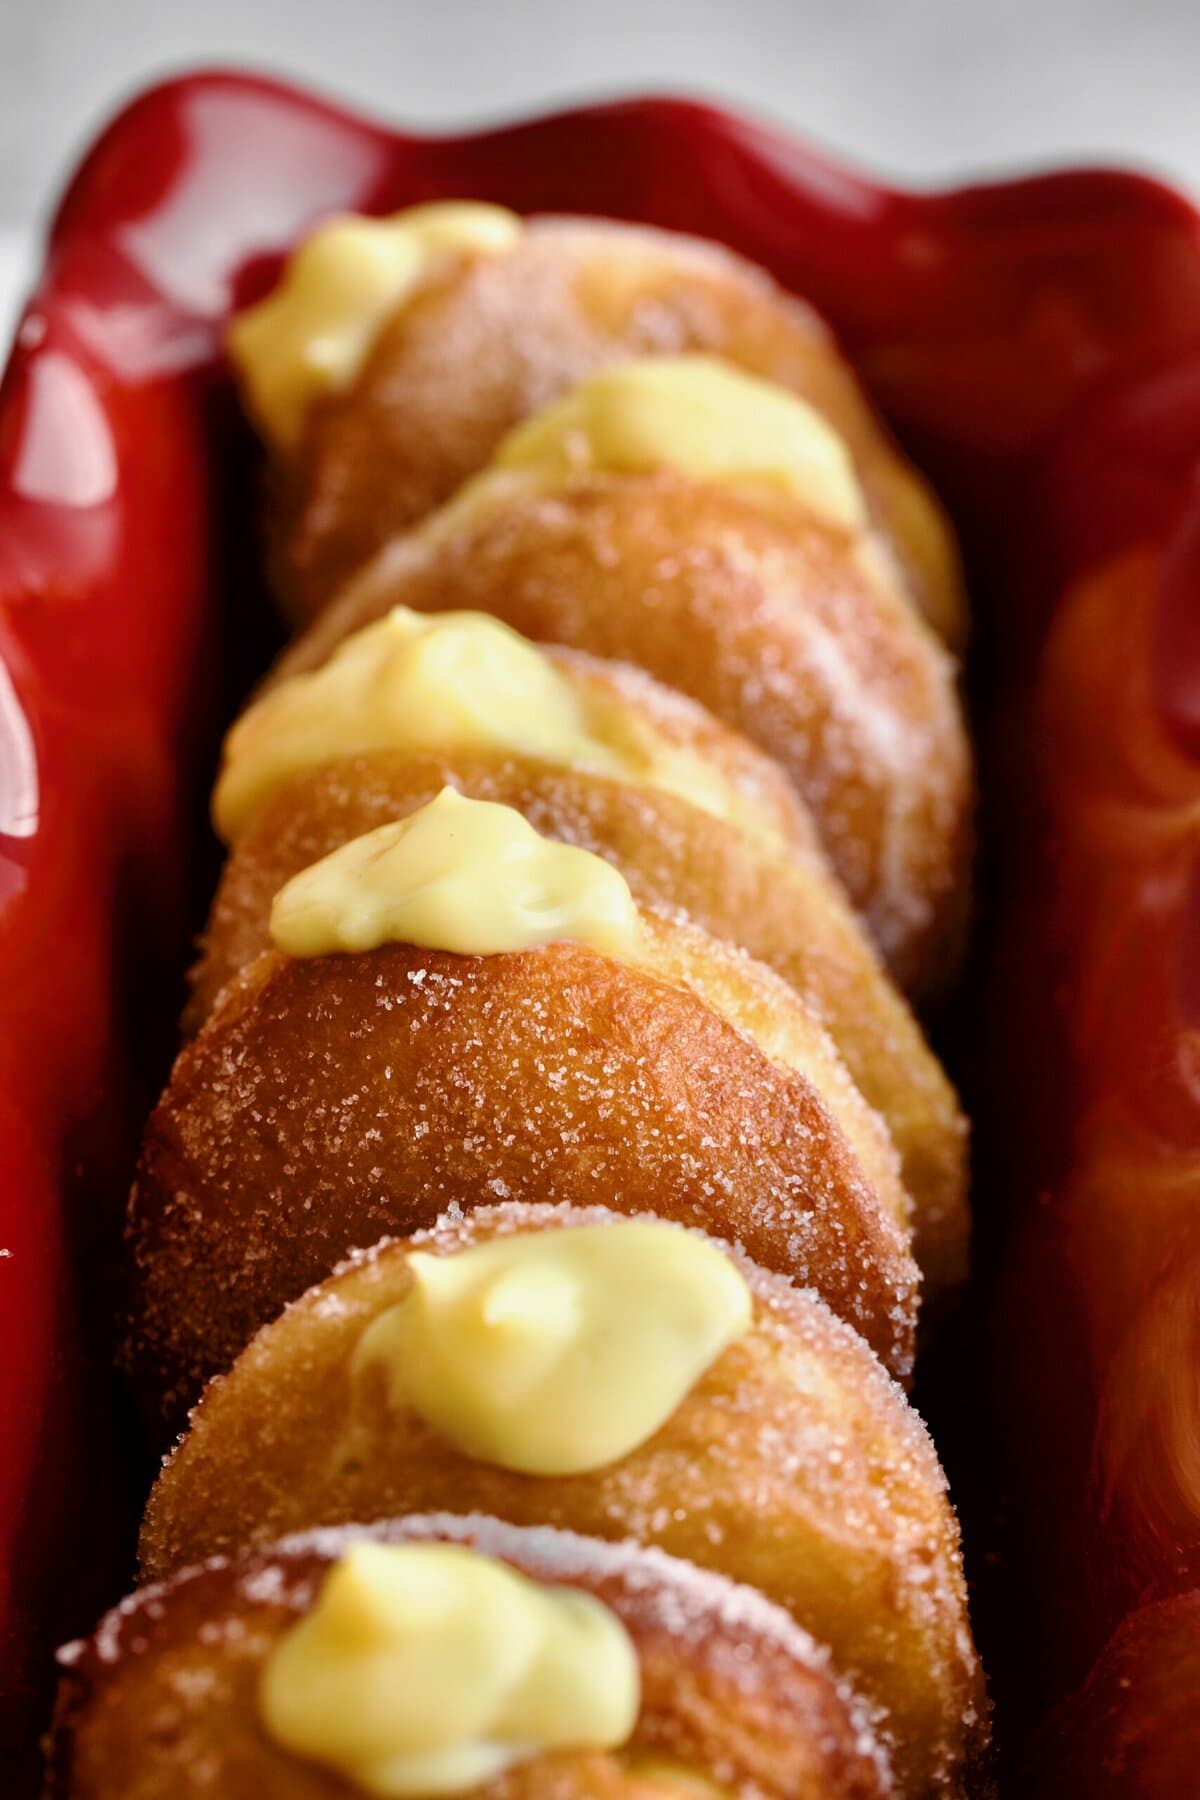 Bomboloni Recipe (Italian Donuts with Cream Filling) in a red ruffled narrow cake pan. Cream coming out of the top of the donuts.